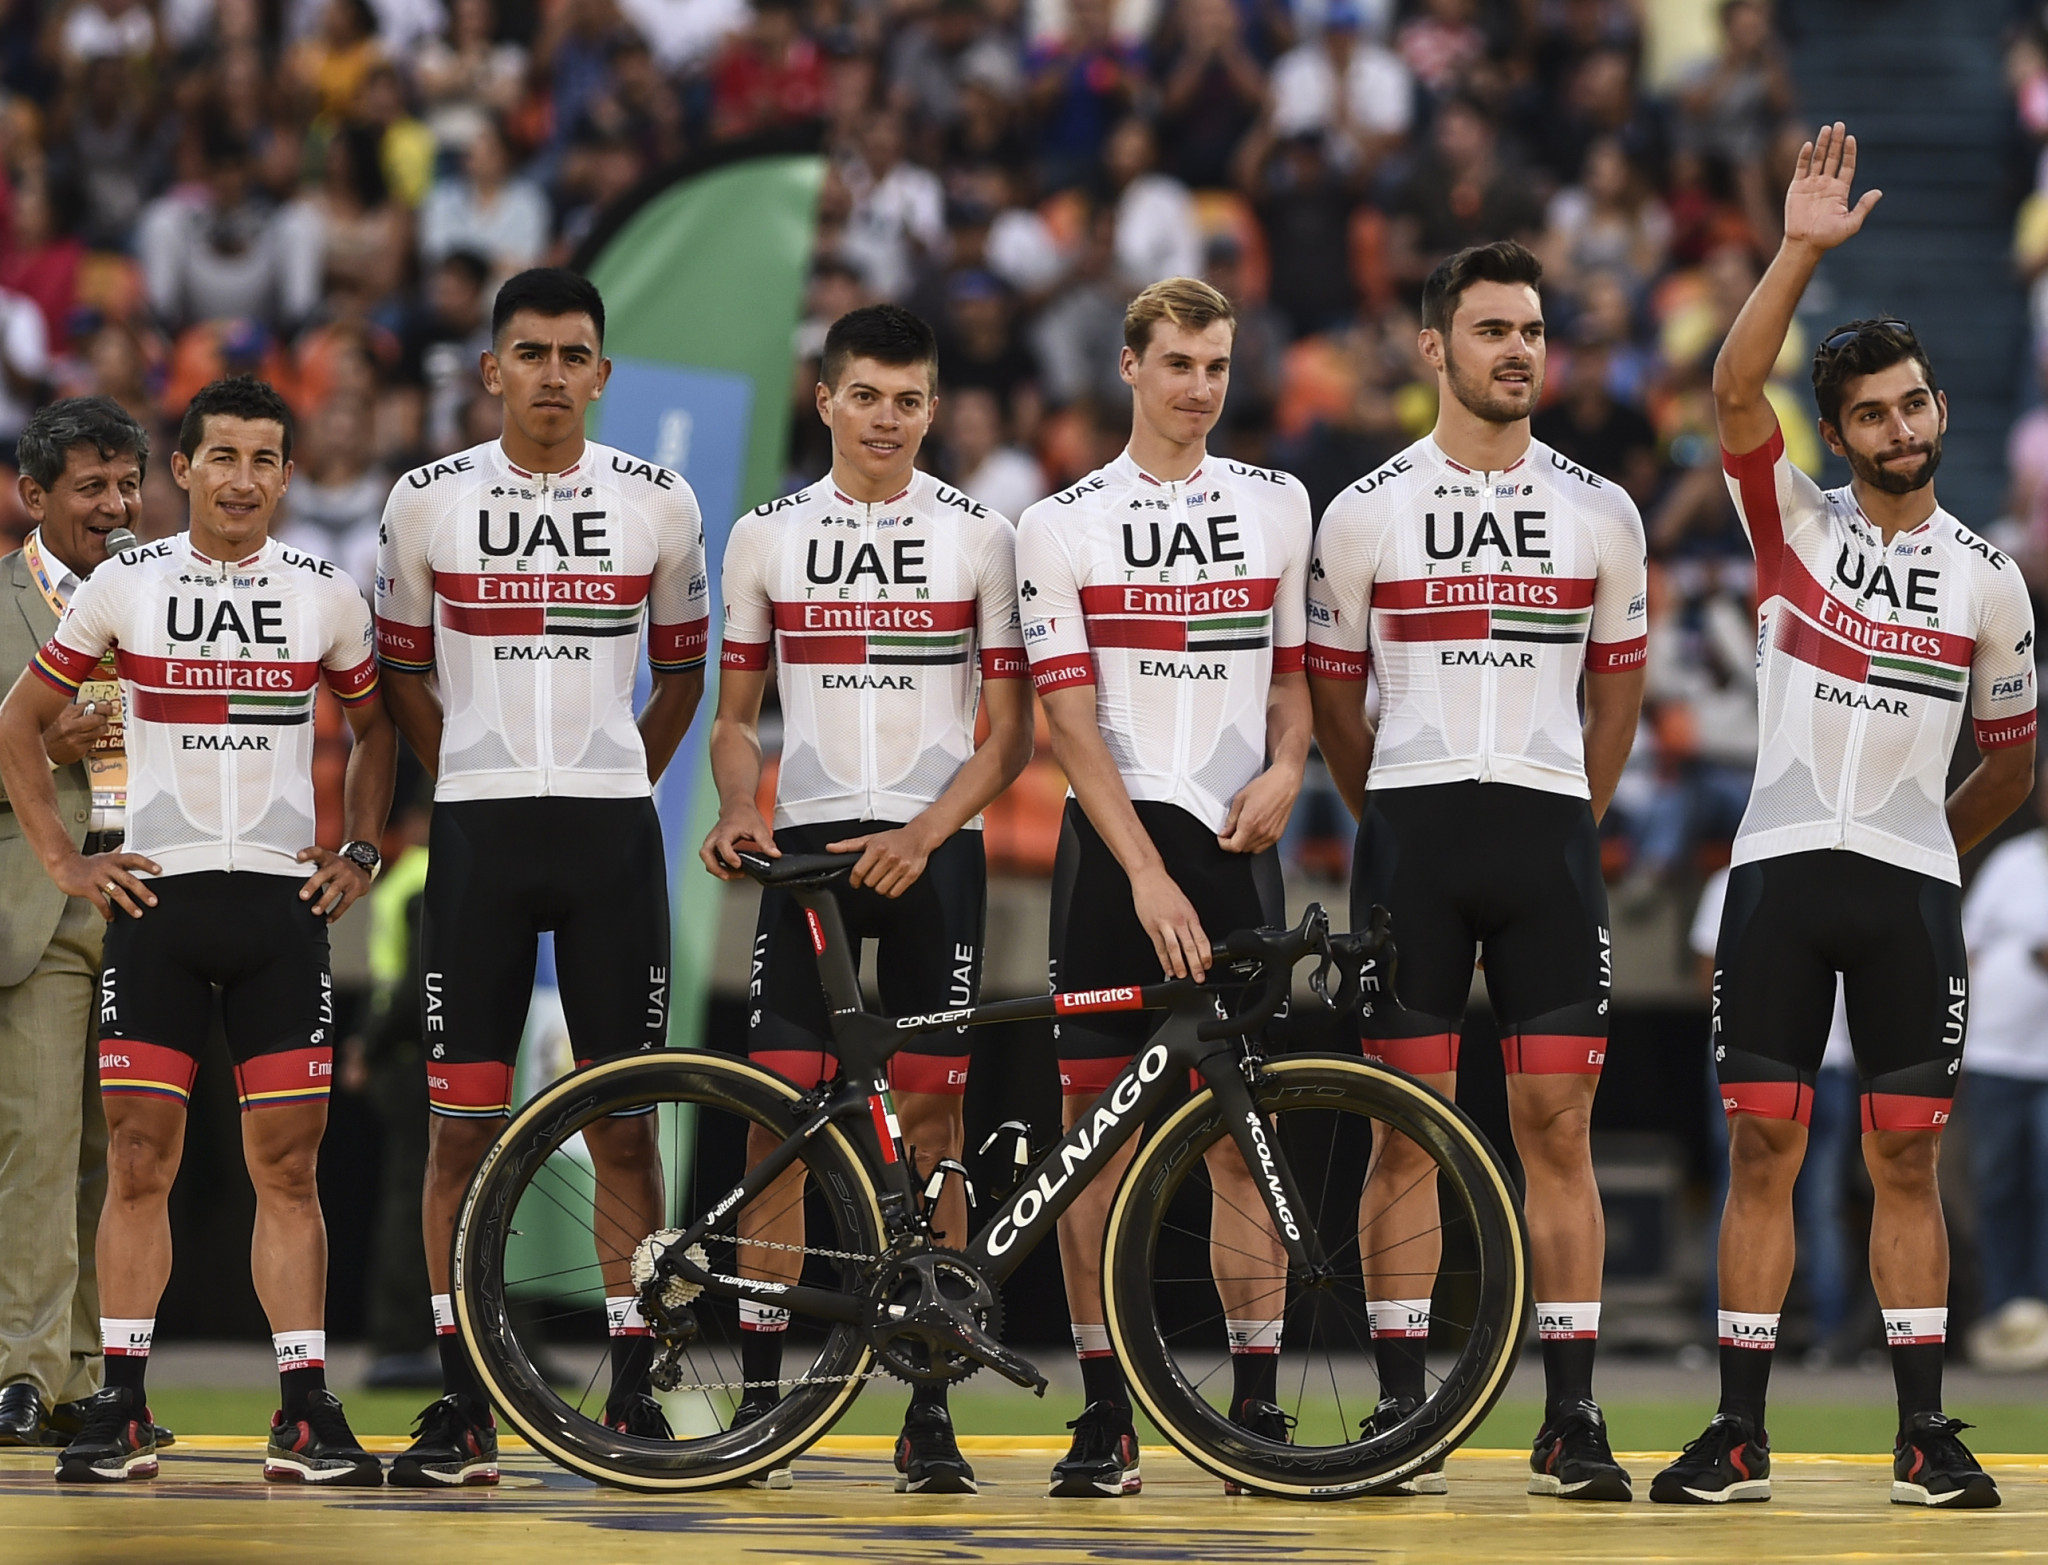 The competition will be a home race for the UAE Team Emirates squad ©Getty Images